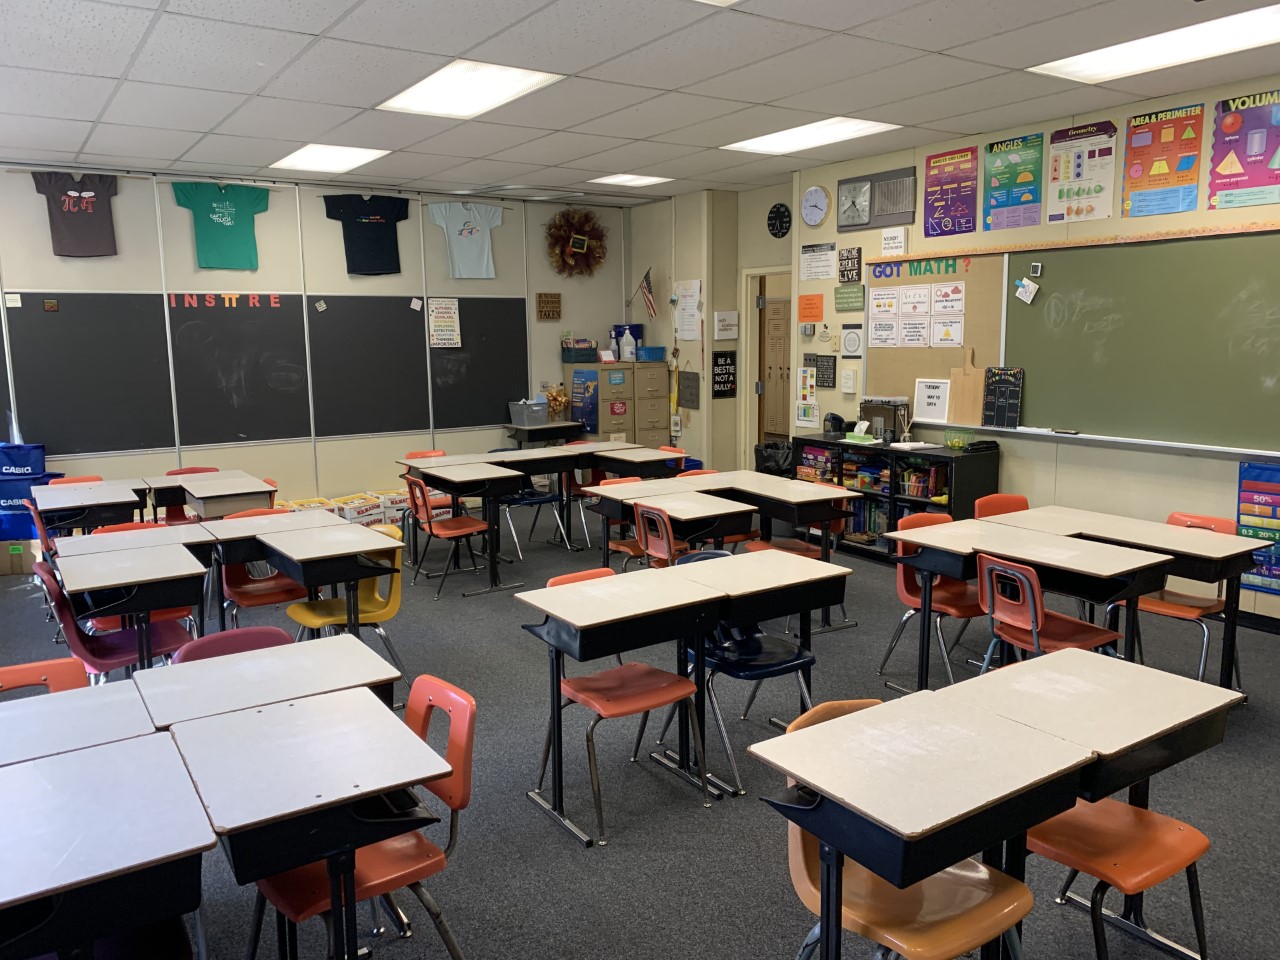 Dense classroom layout with desks and chairs formed in small clusters.